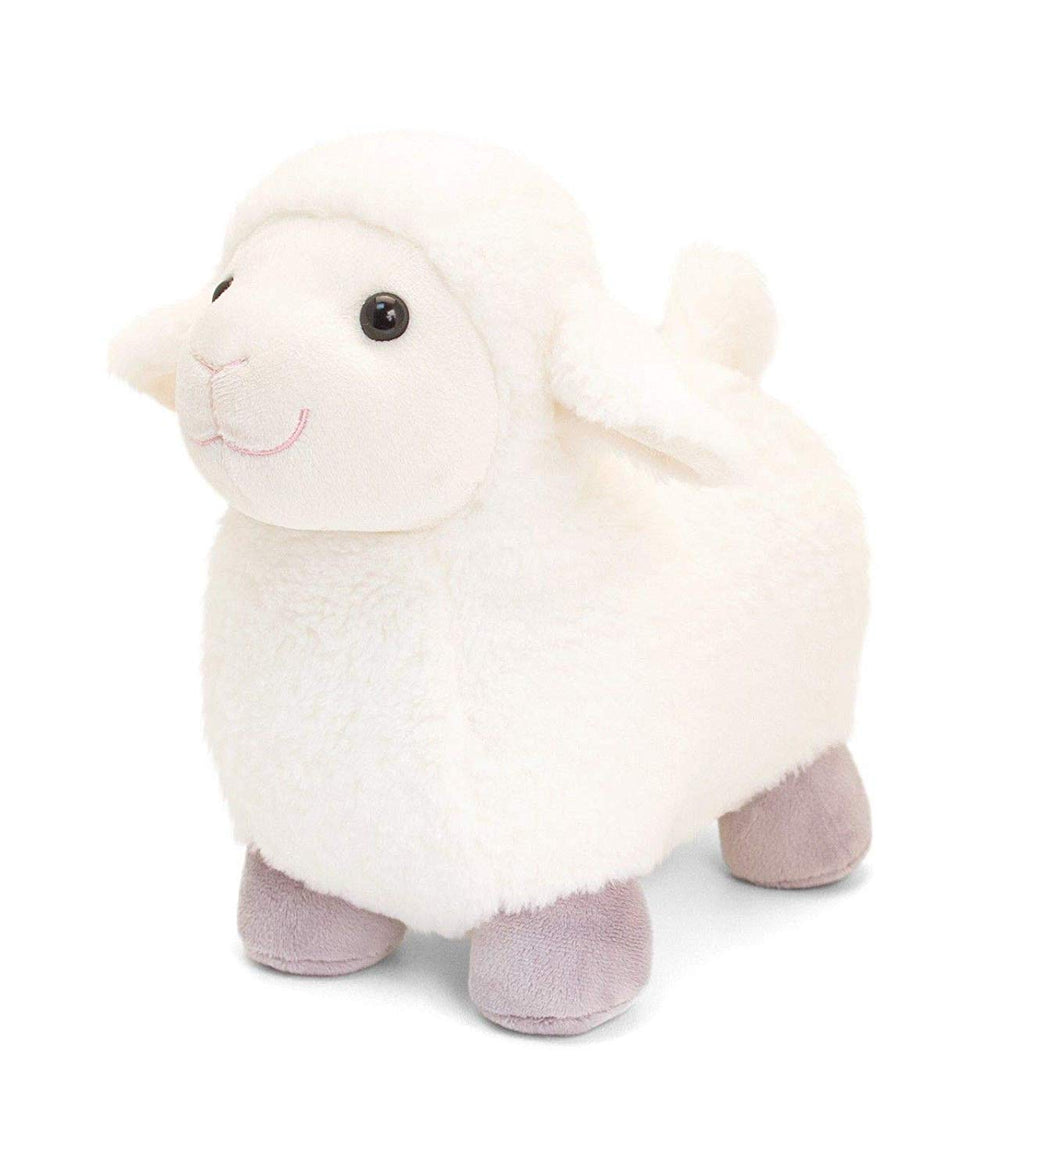 Keel Toys Standing Sheep (20cm) Soft Toy - Perfect alternative Easter Gift!